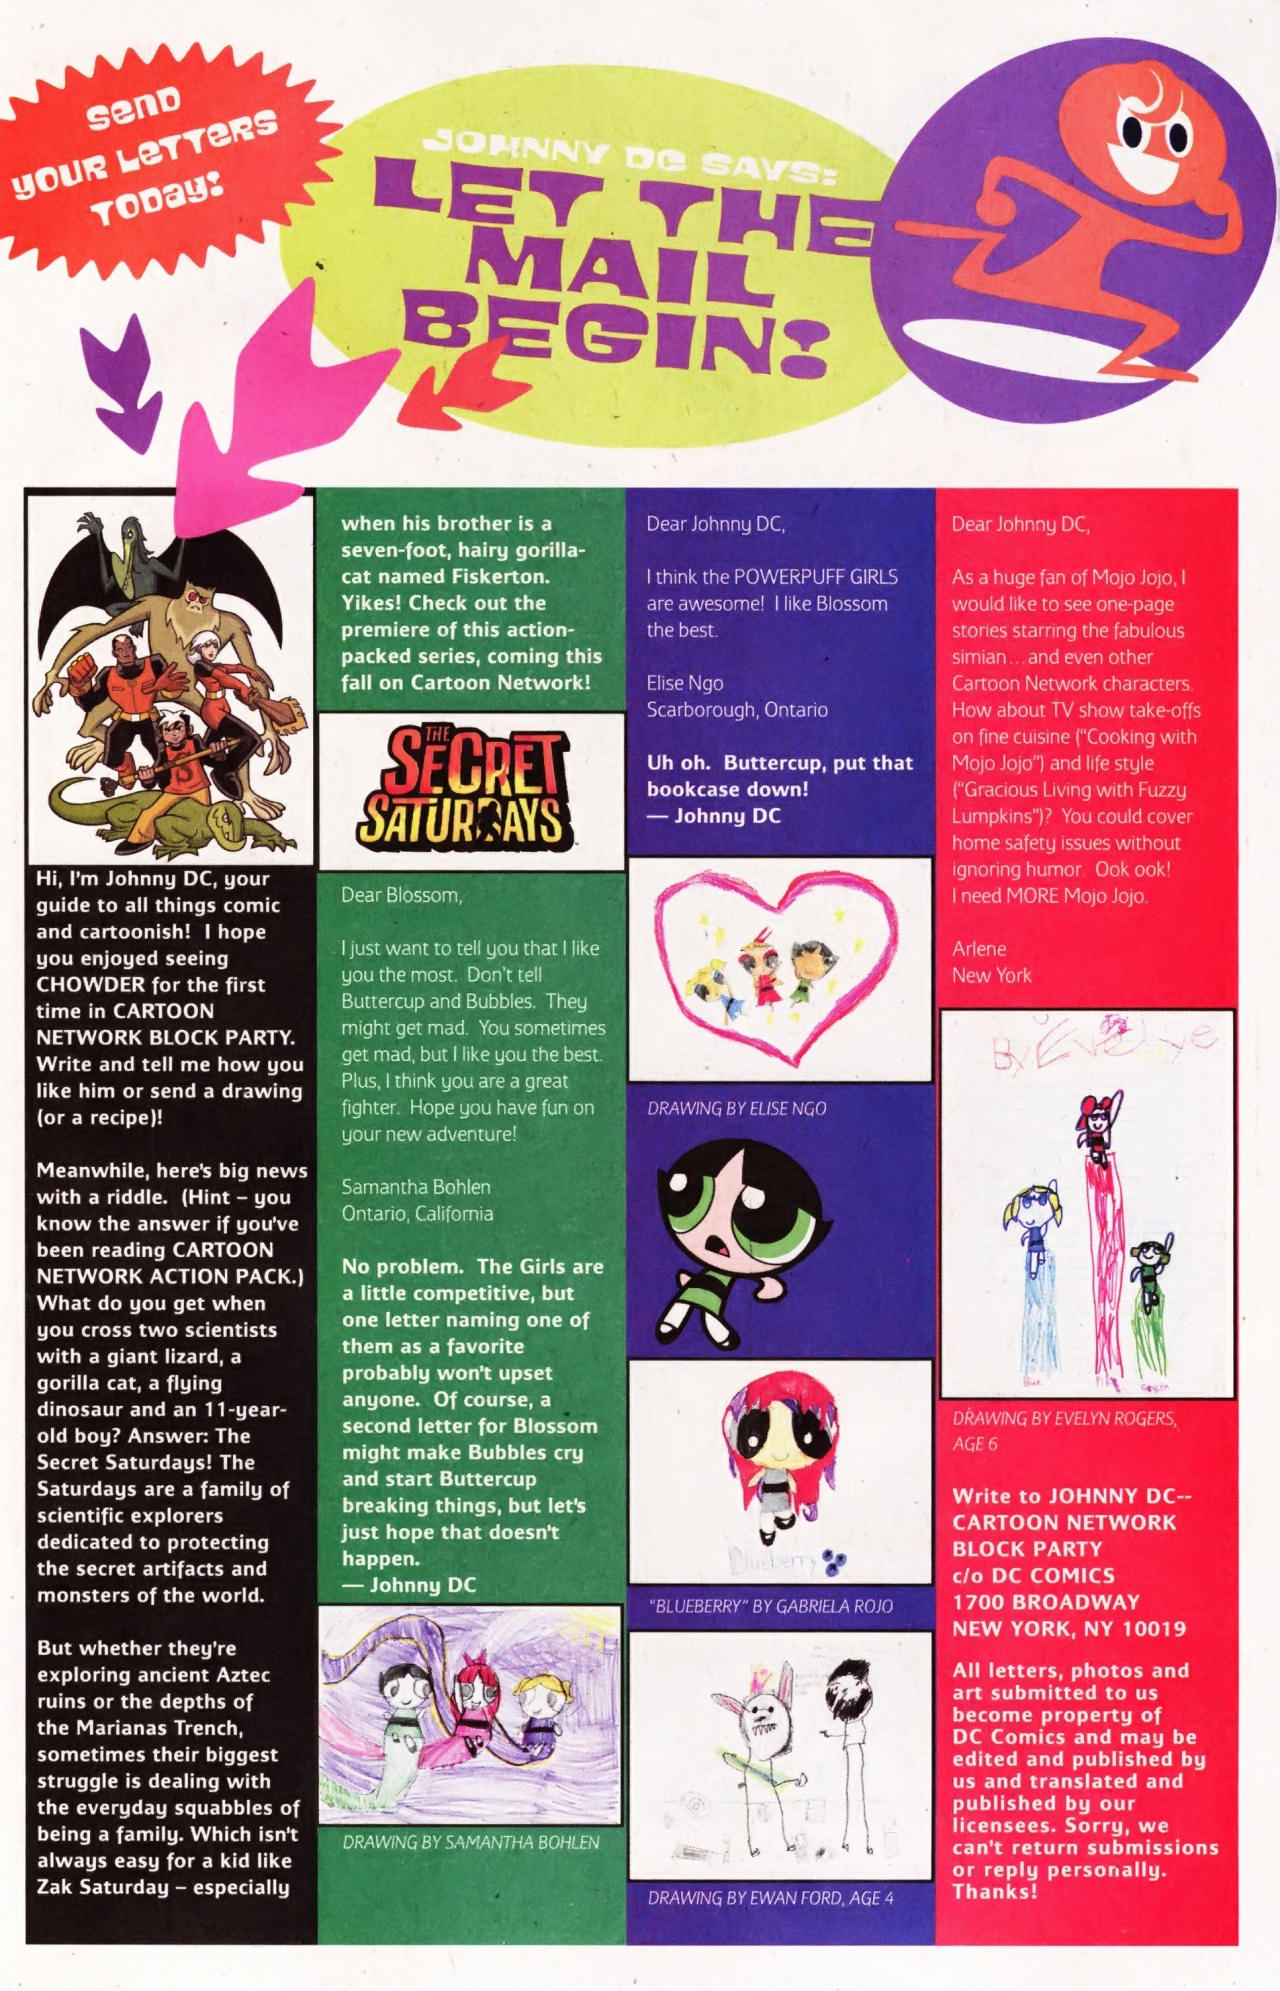 Read online Cartoon Network Block Party comic -  Issue #49 - 33